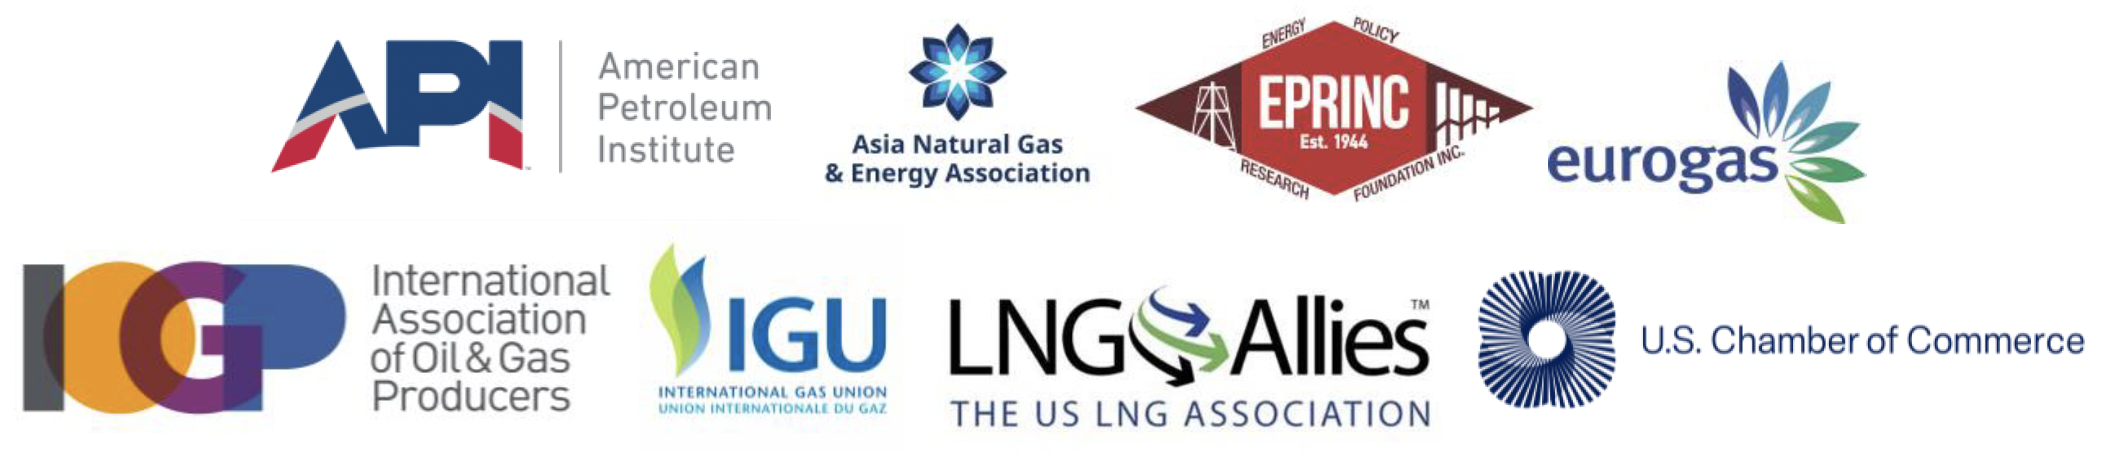 EPRINC Joins Group of Thought Leaders In Writing to Japan's Prime Minister About Natural Gas and Its Importance to Energy Security